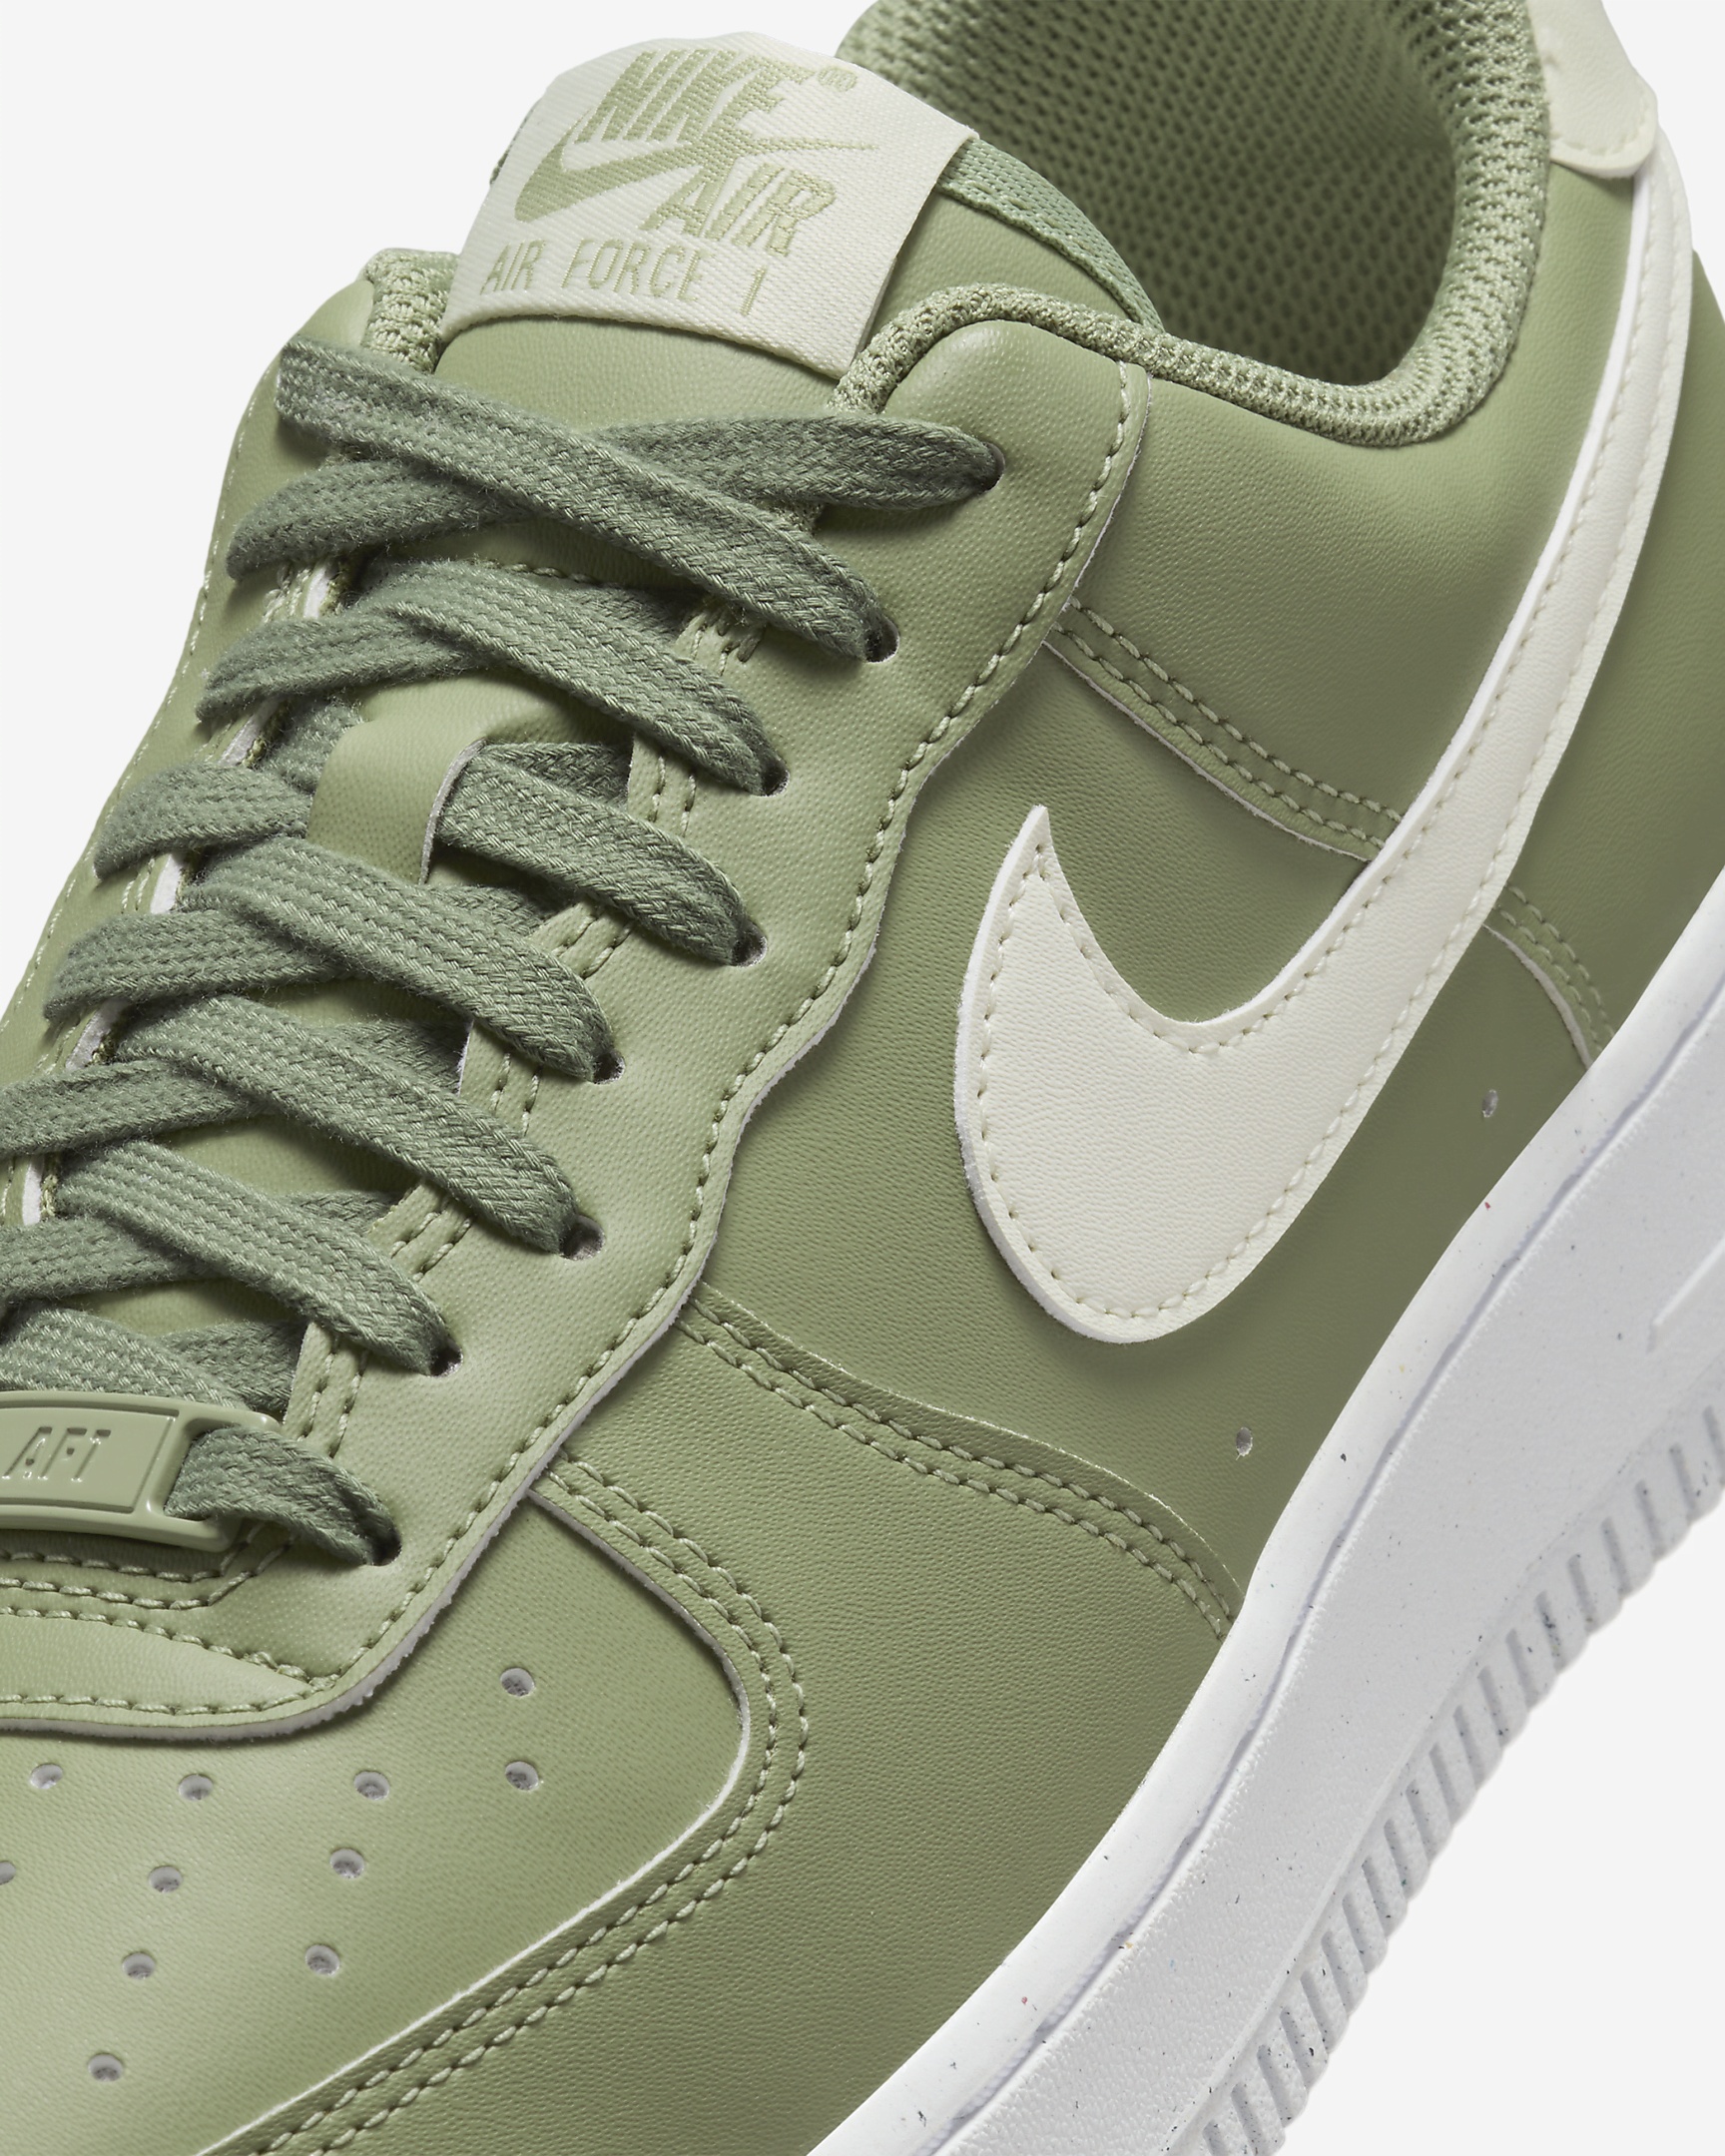 Nike Women's Air Force 1 '07 Shoes - 8